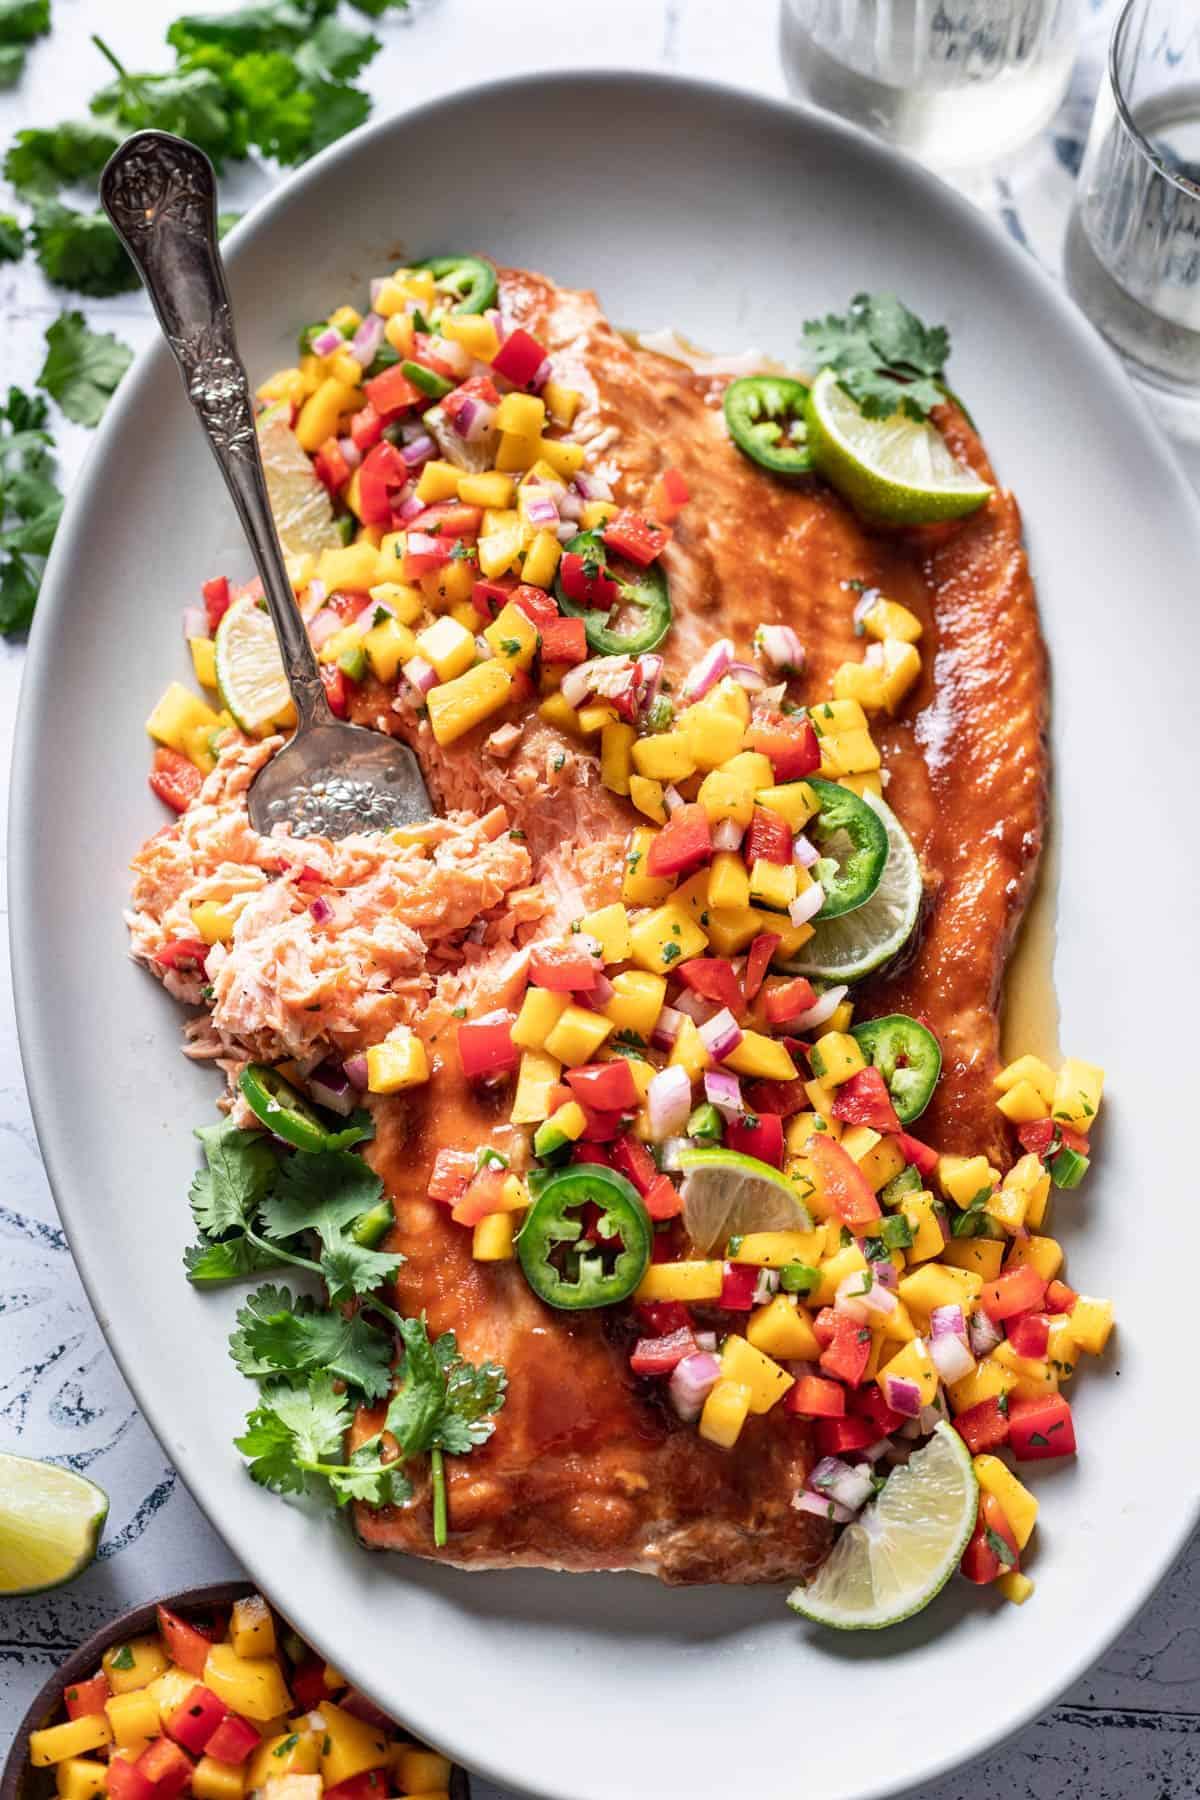 Baked salmon with mango salsa and chopped veggies on a white plate with a fork.